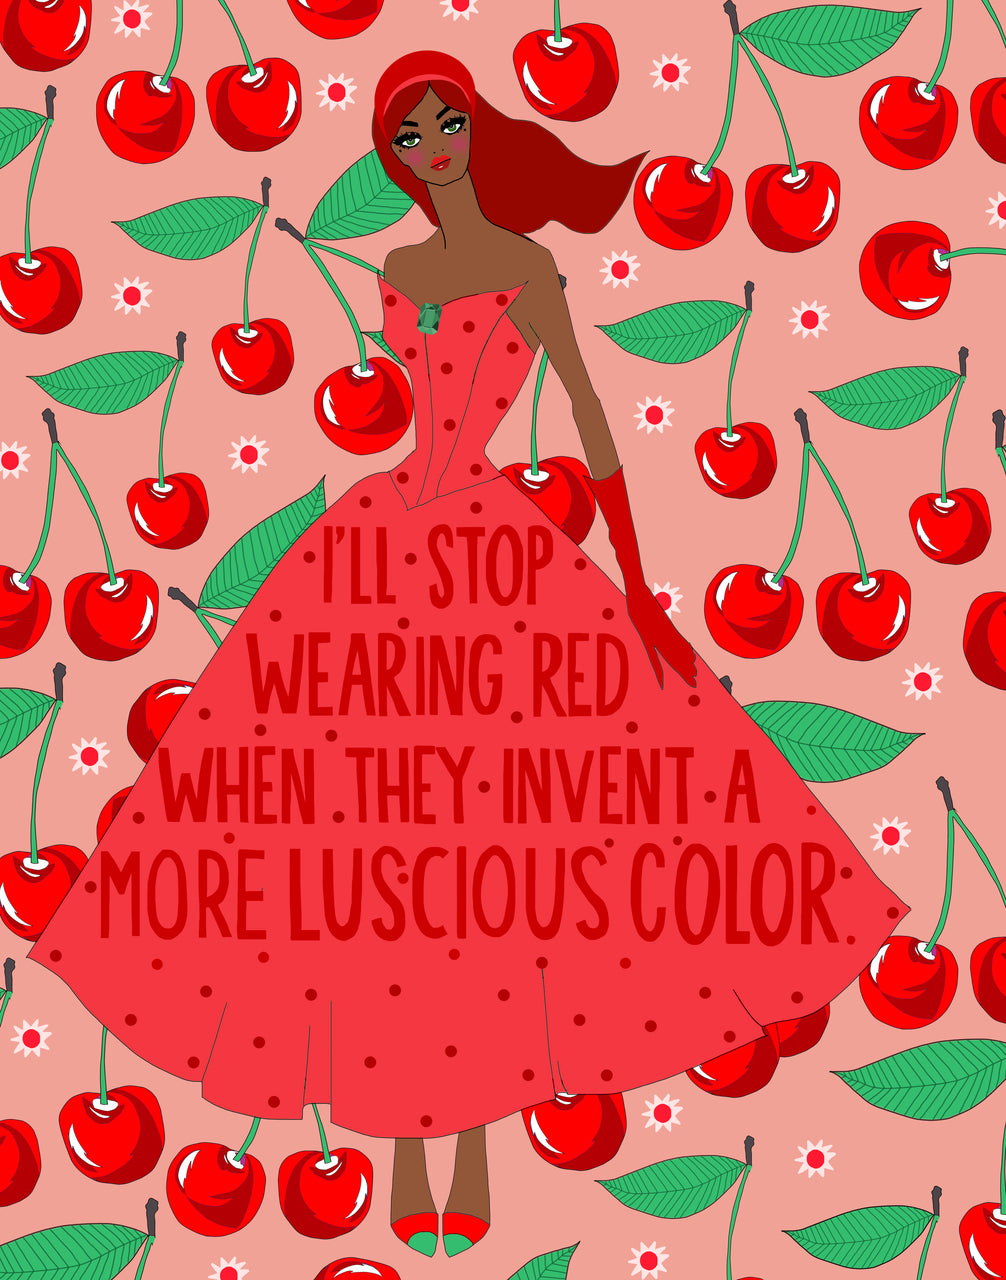 I'll Stop Wearing Red When They Invent a More Luscious Color.